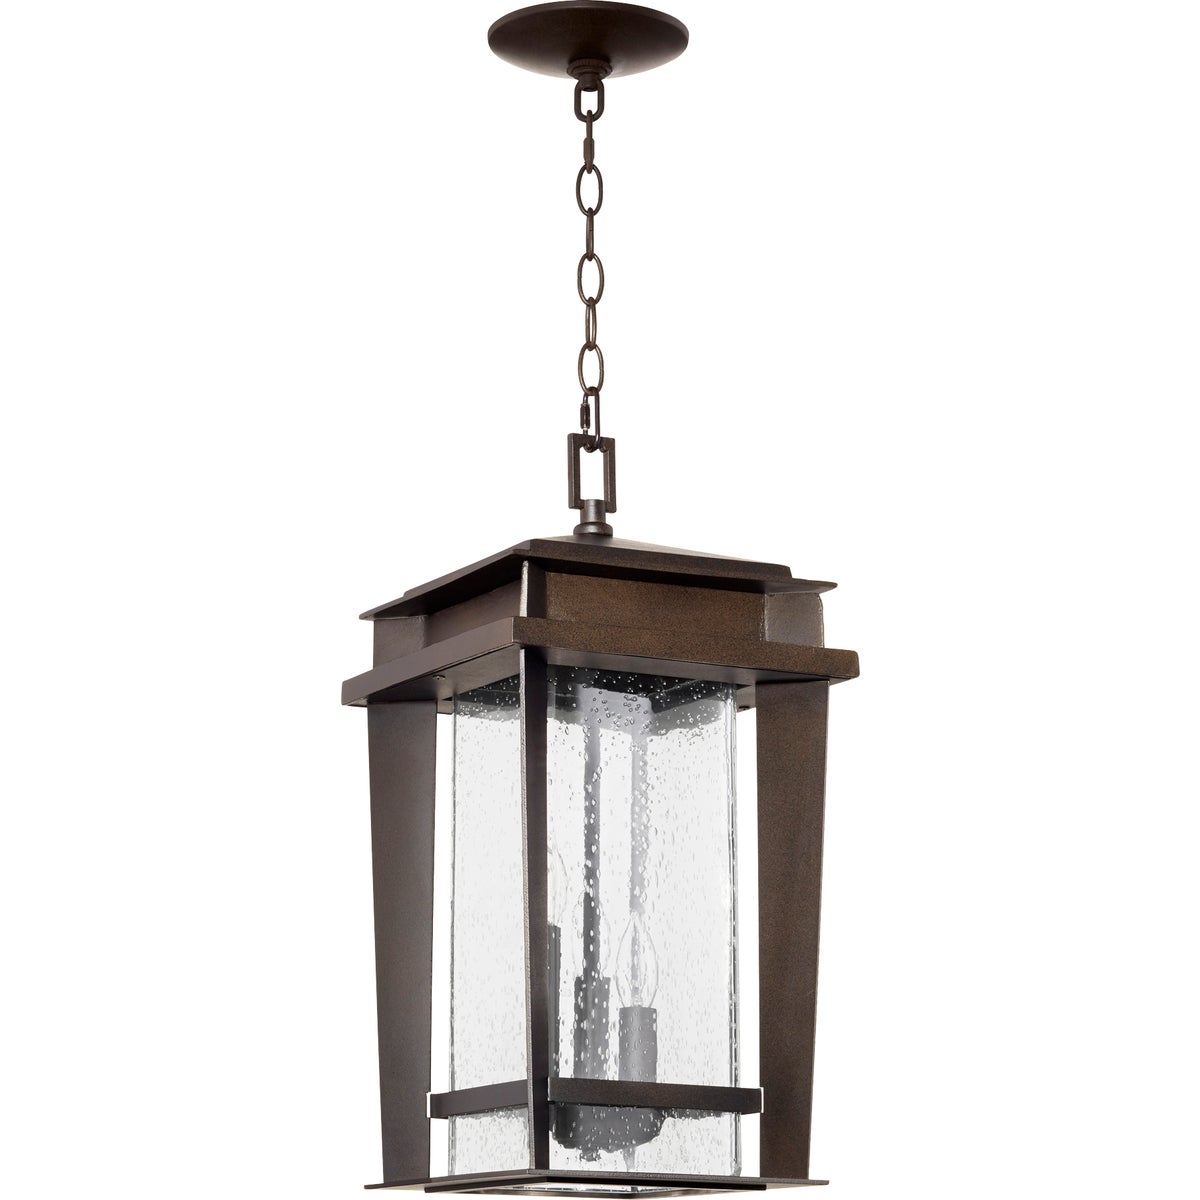 Bronze Outdoor Hanging Light fixture with a chain and a clear seeded glass shade diffuser. Adds mid-century modern flair to your home's exterior. Safe for damp or wet environments. Perfect for covered porches, patios, or verandas. Crafted from durable metal. Wattage: 60W. Dimensions: 9.5"W x 17"H. UL Listed. Wet Location safety rating. 2-year warranty.